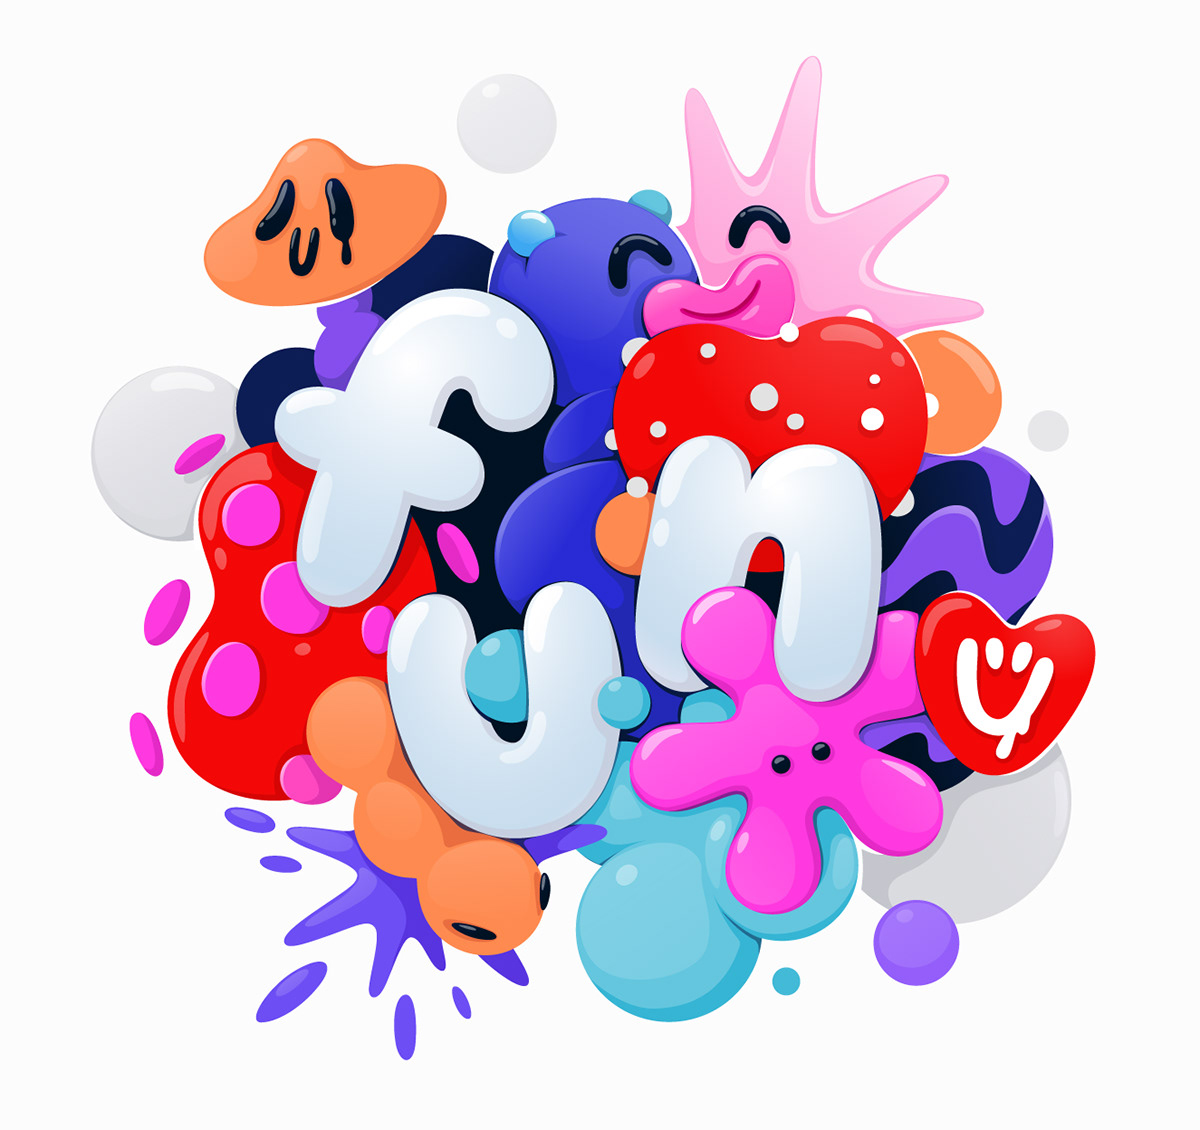 cartoon characters colorful ILLUSTRATION  microcosm Nature abstract Digital Art  Character design  Drawing 